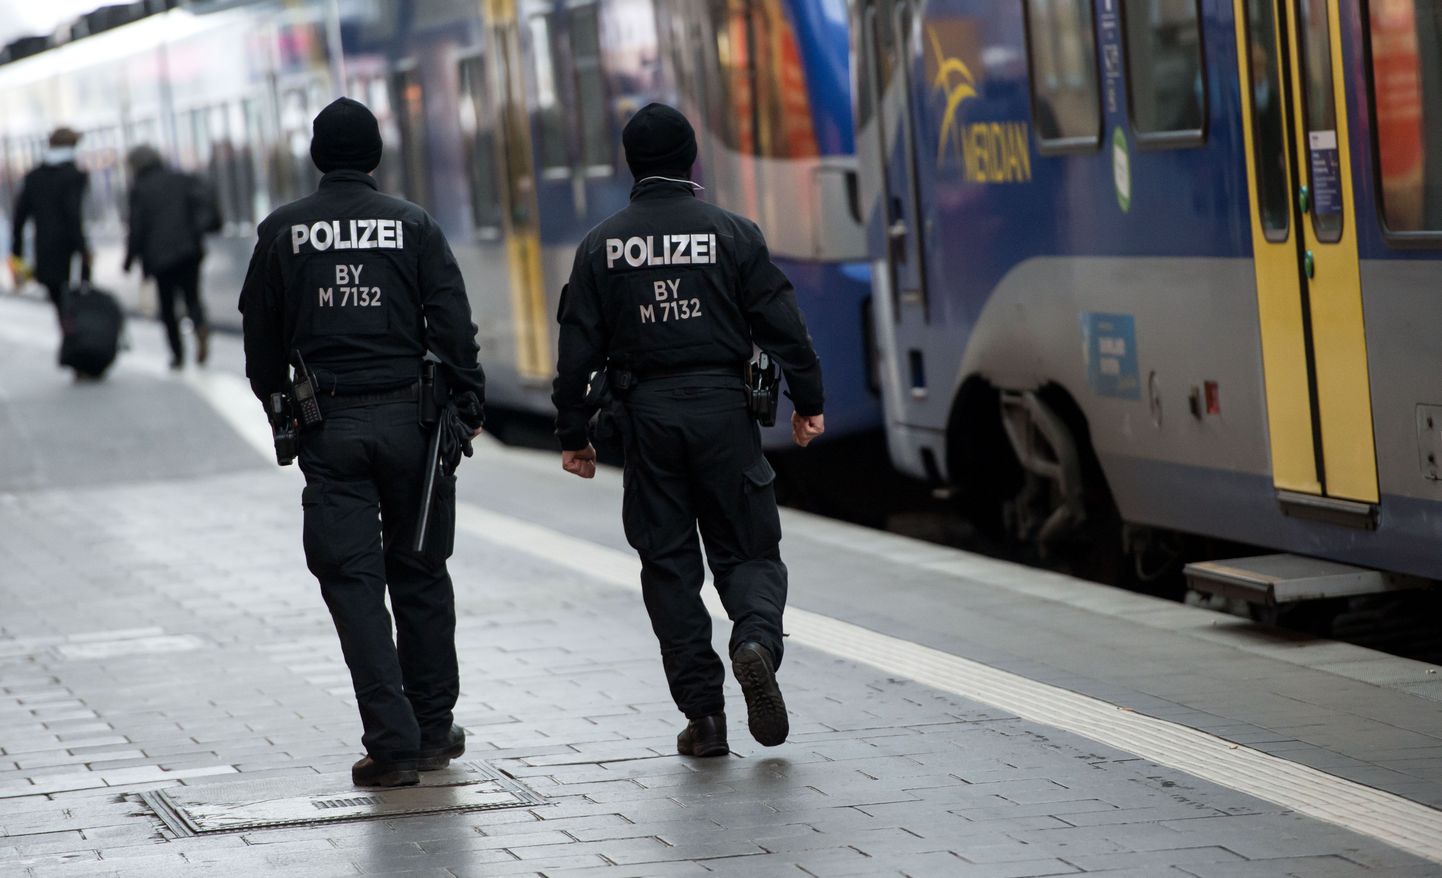 Police patrol at the main railway station in Munich, southern Germany, Saturday, Jan. 2, 2016. Police are maintaining a heightened presence following warnings of a planned attack on New Year's Eve. (Sven Hoppe/dpa via AP)